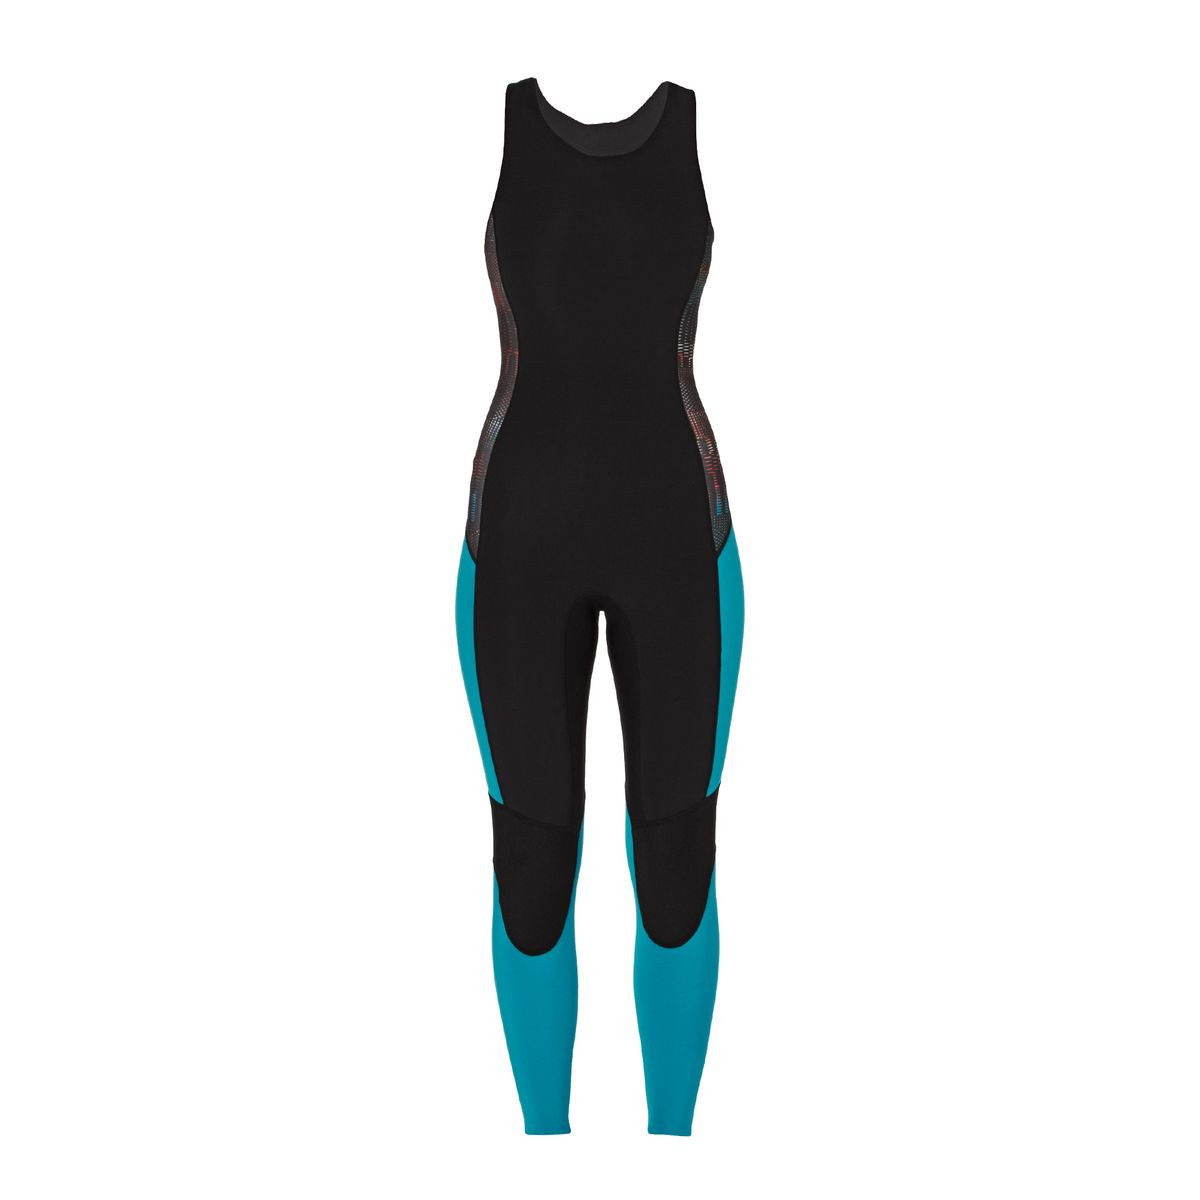 Patagonia Womens R1 1.5mm Zipperless Long Jane Wetsuit - Howling Turquoise